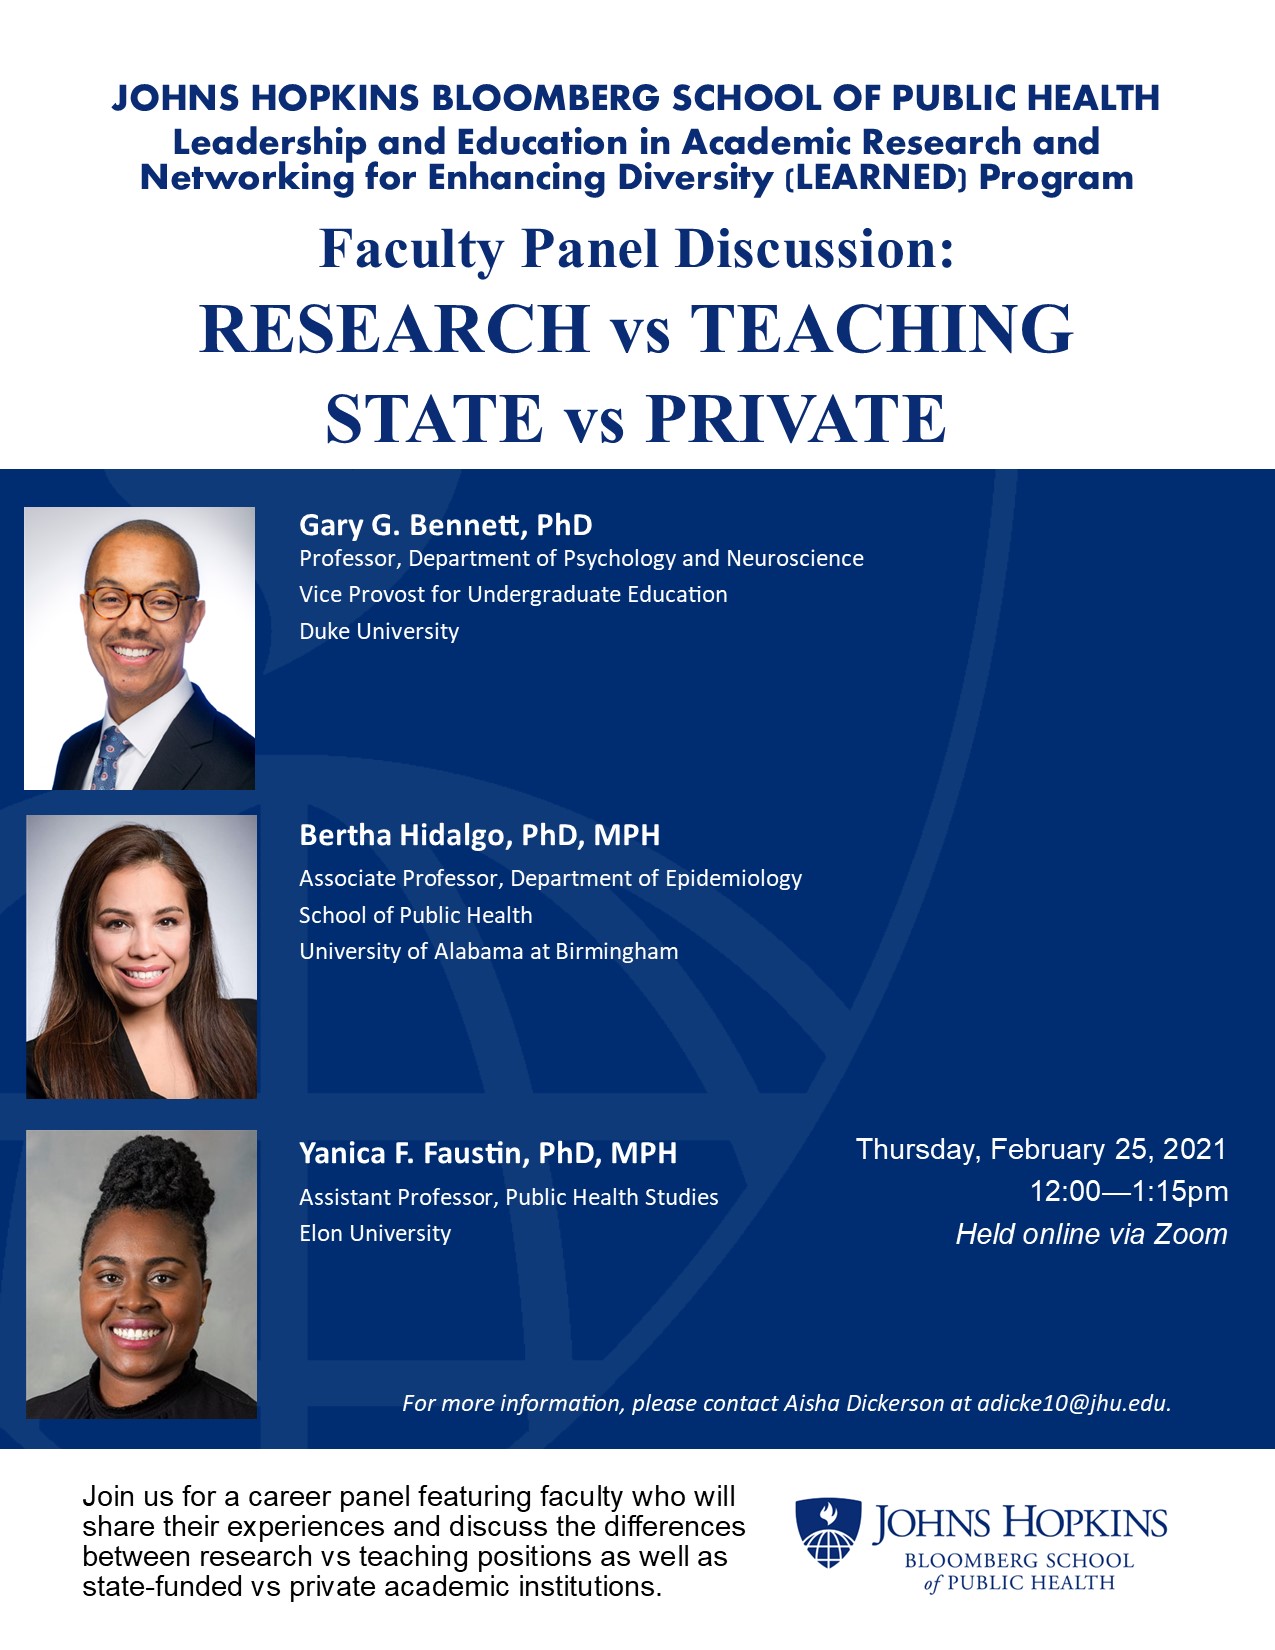 Faculty Panel Discussion Flyer